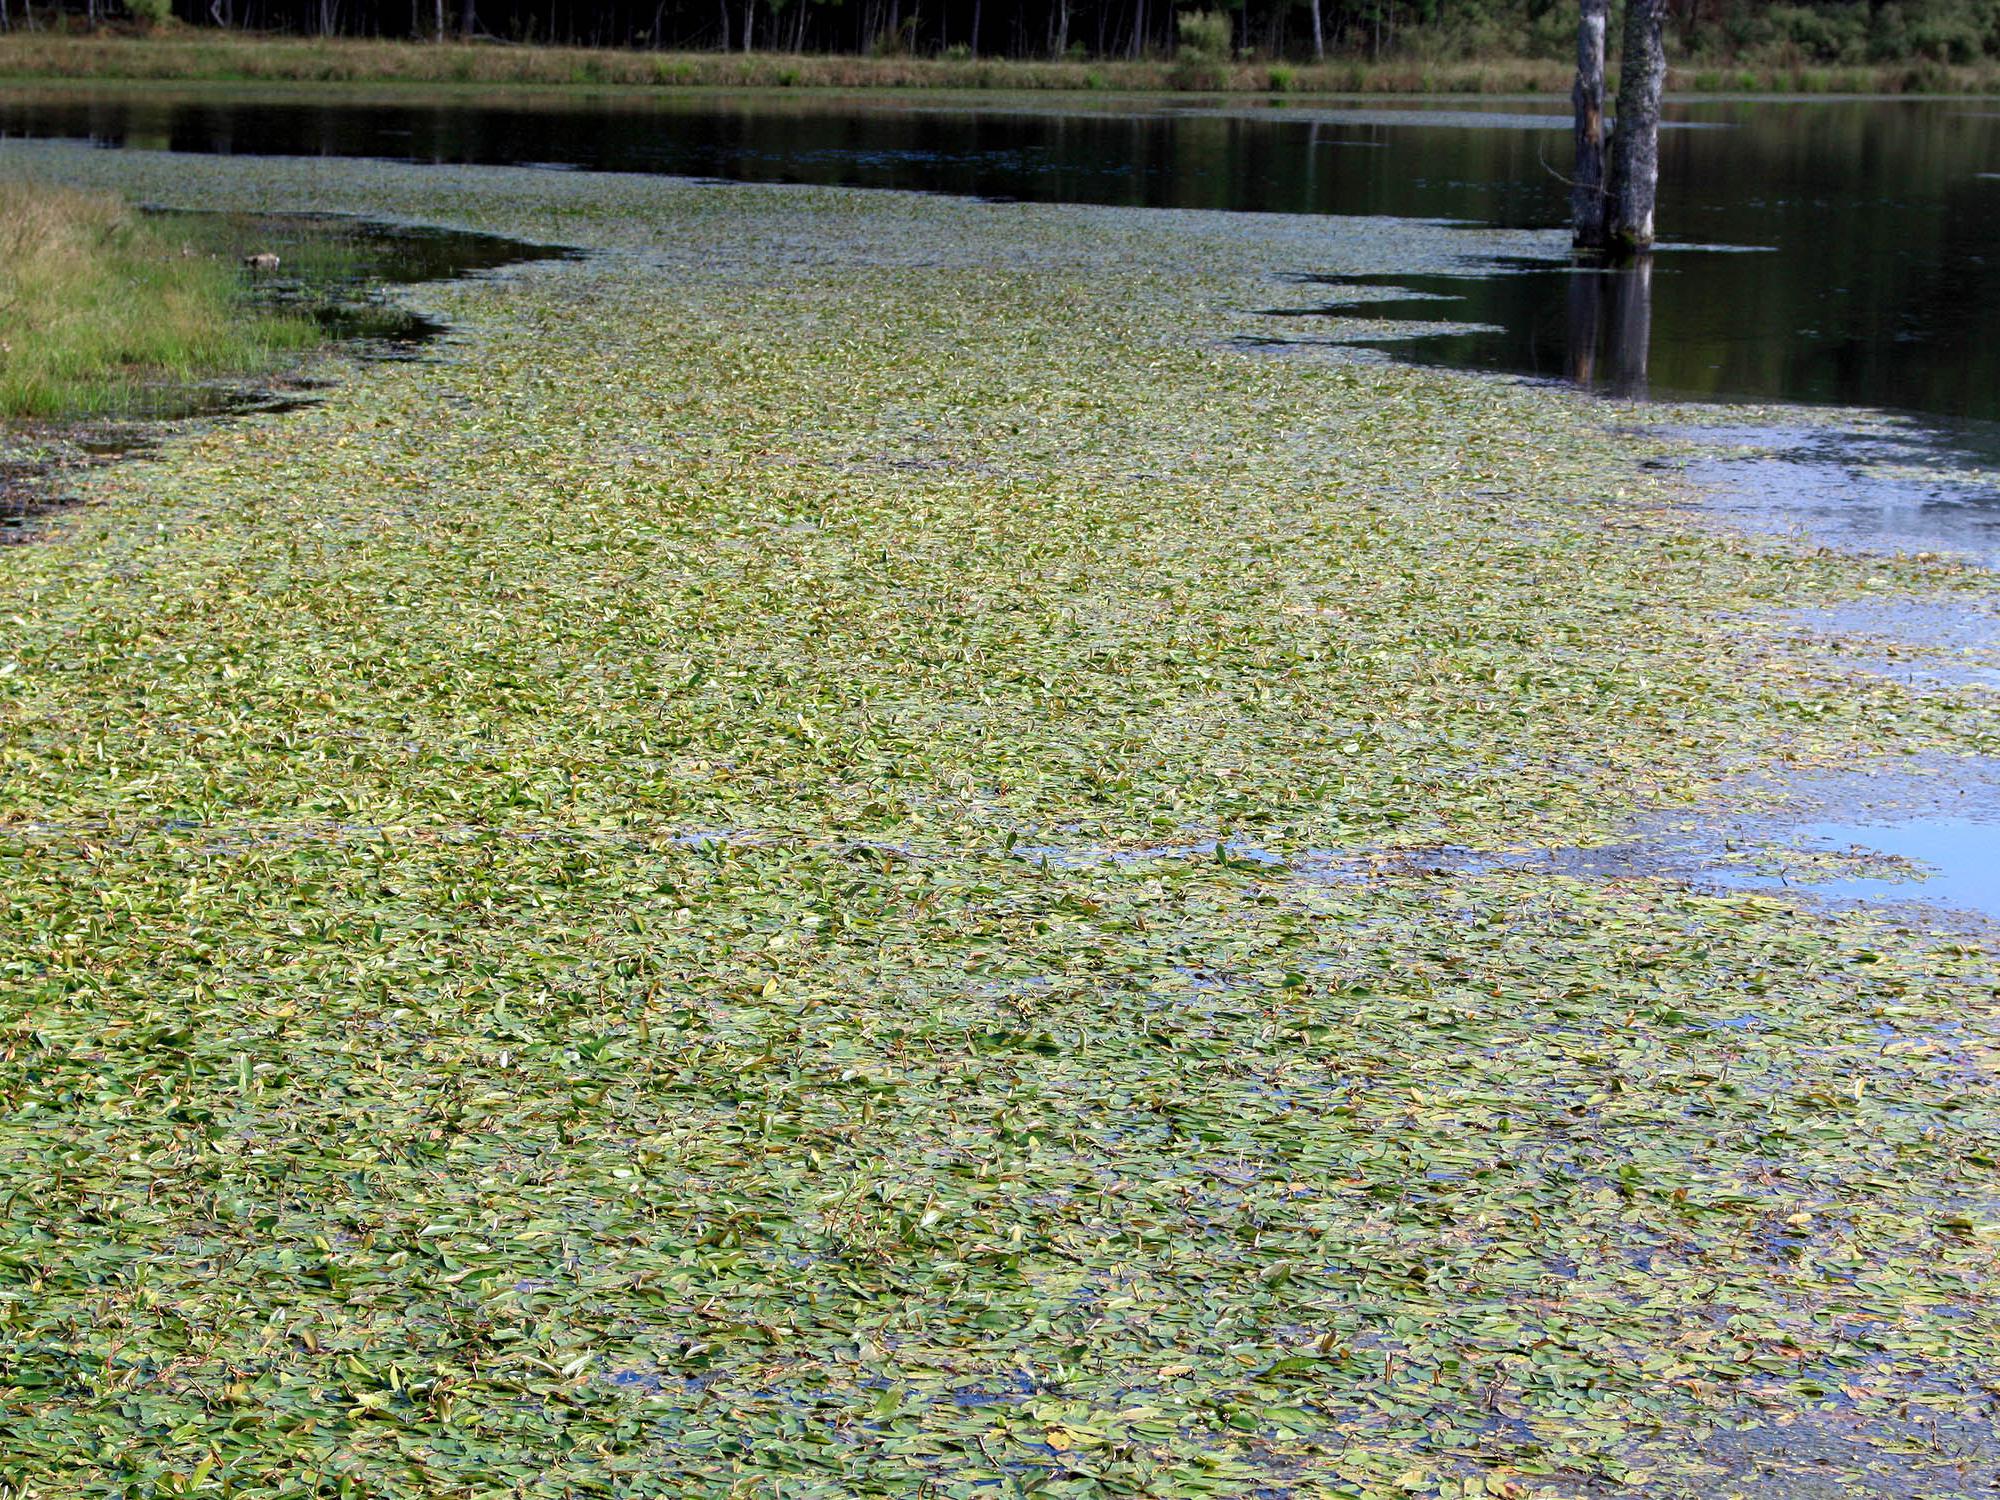 Prevention is the best way to control pond weeds, such as this American pondweed growing in Clay County in 2008, but physical, mechanical, biological and chemical control measures can be used once weeds become established. (File photo courtesy of Wes Neal)